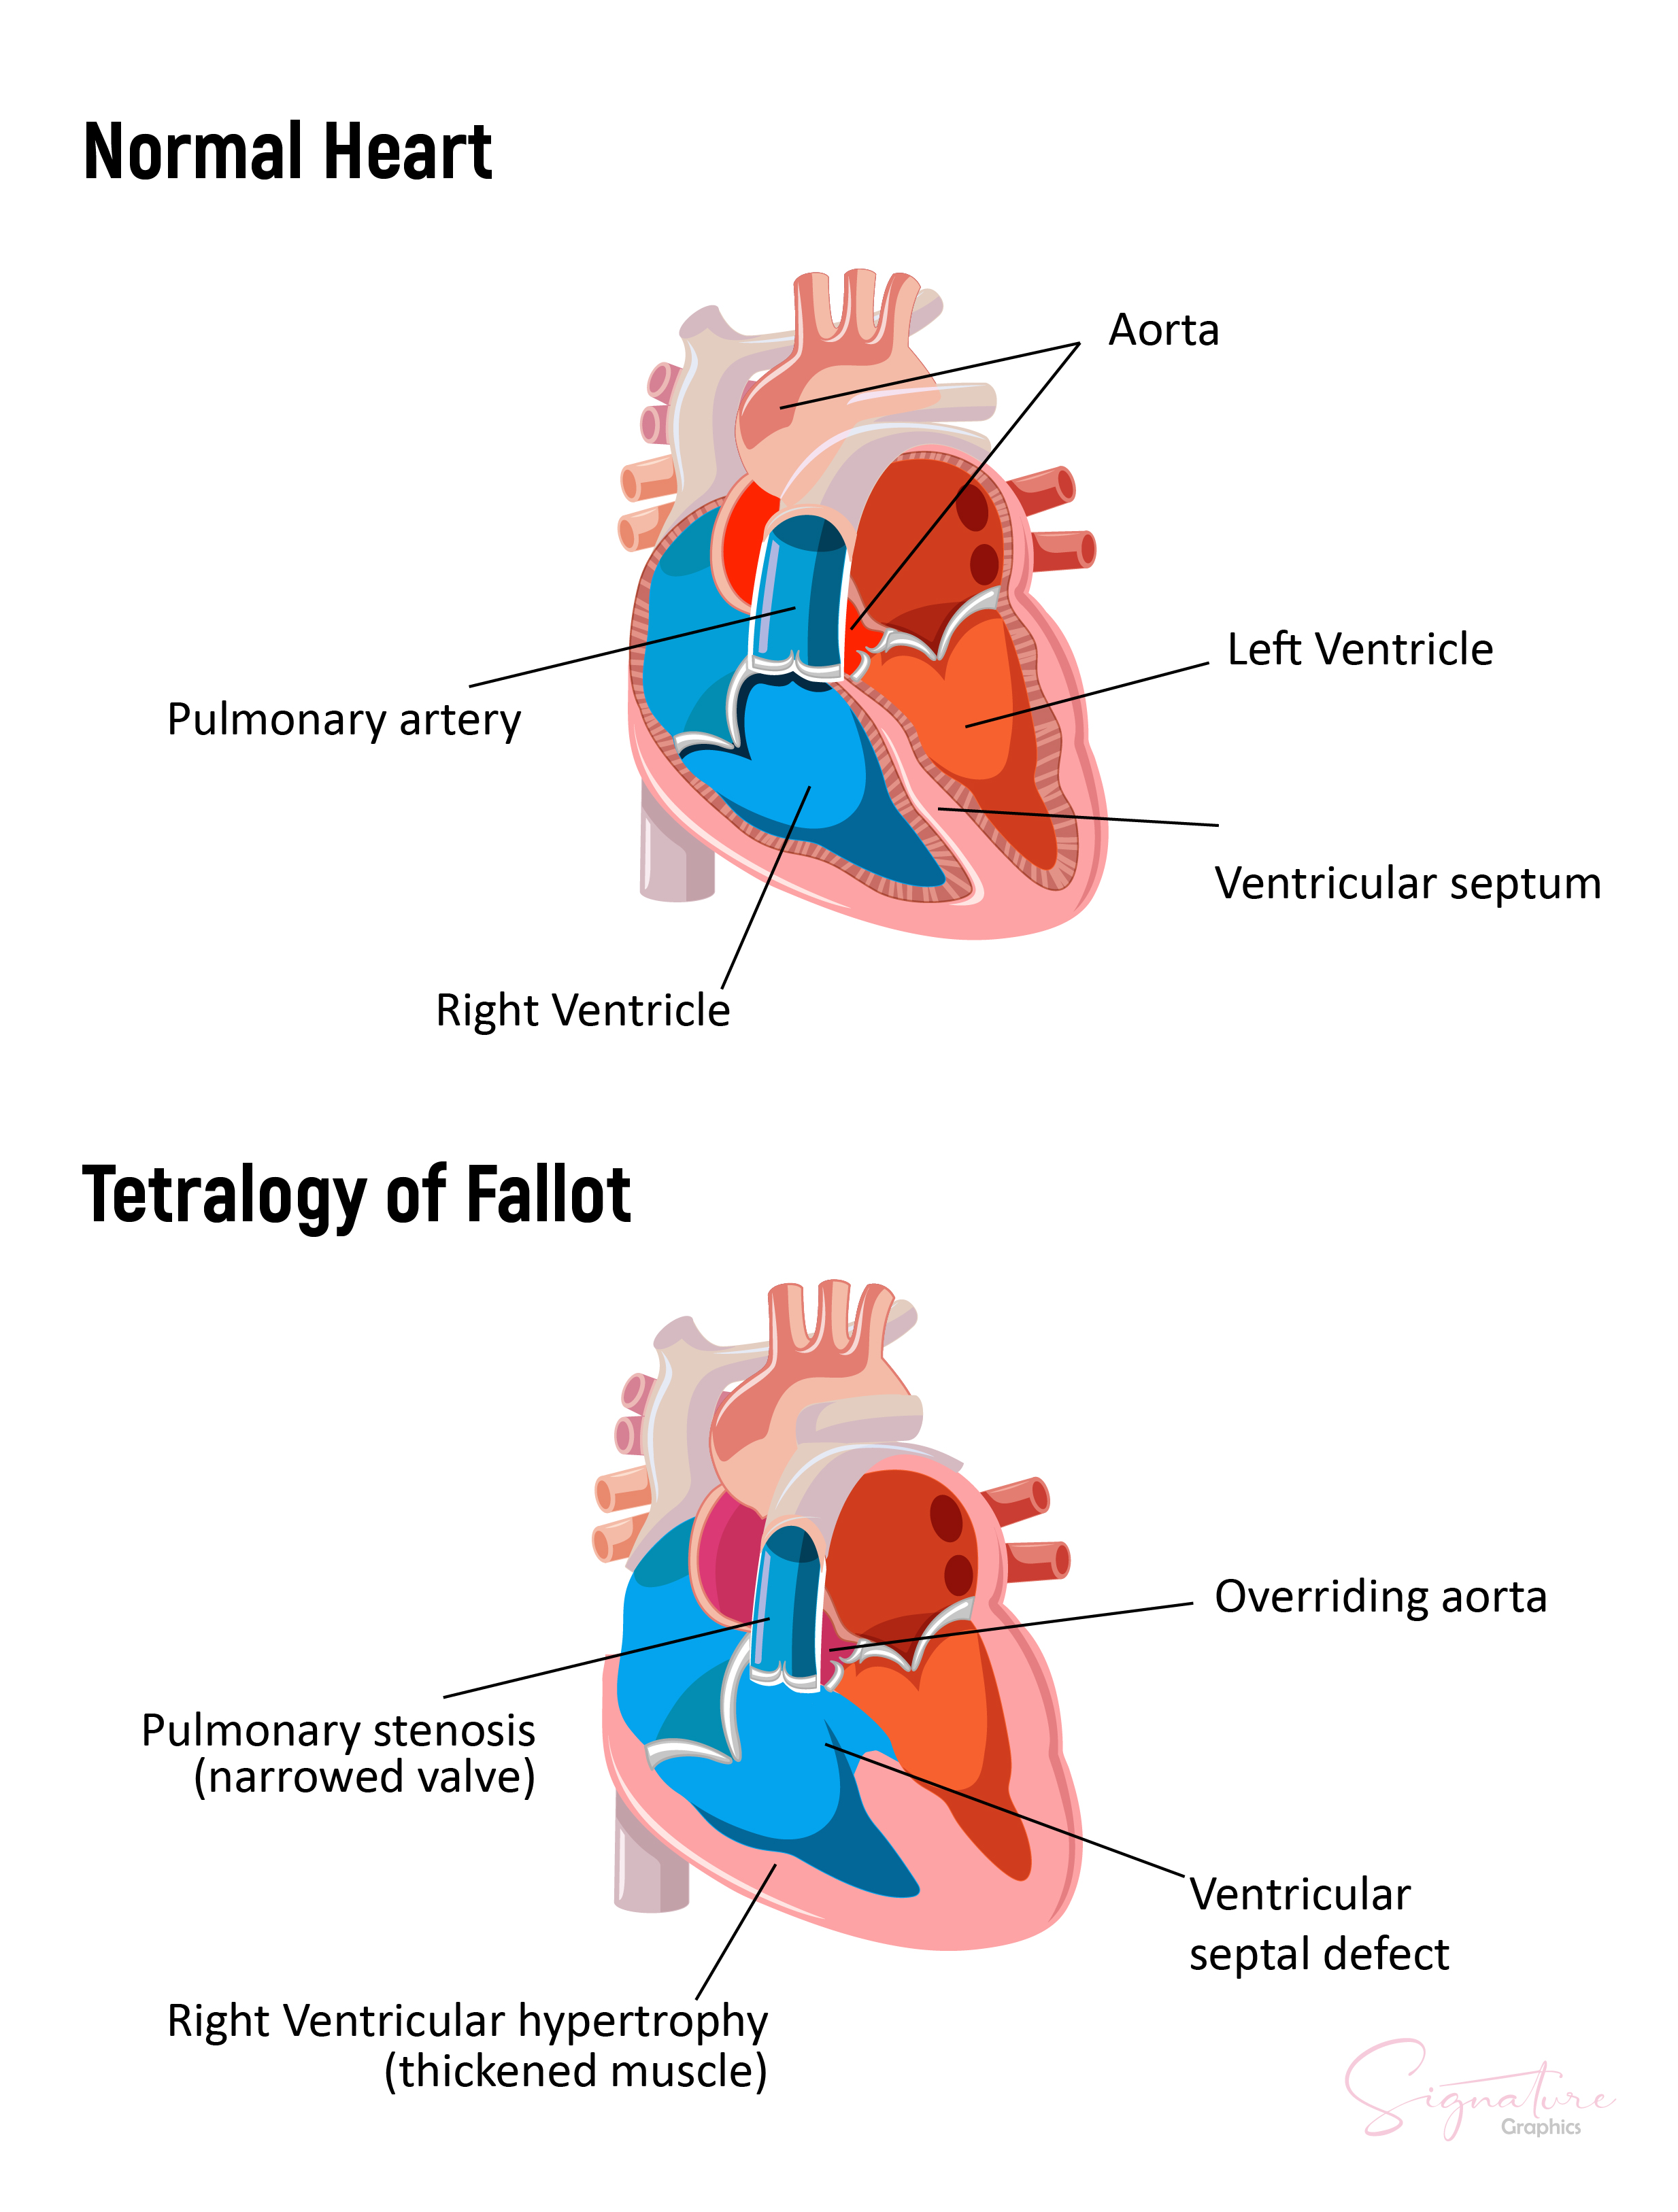 This image illustrates differences between a normal heart and a heart with tetralogy of Fallot.